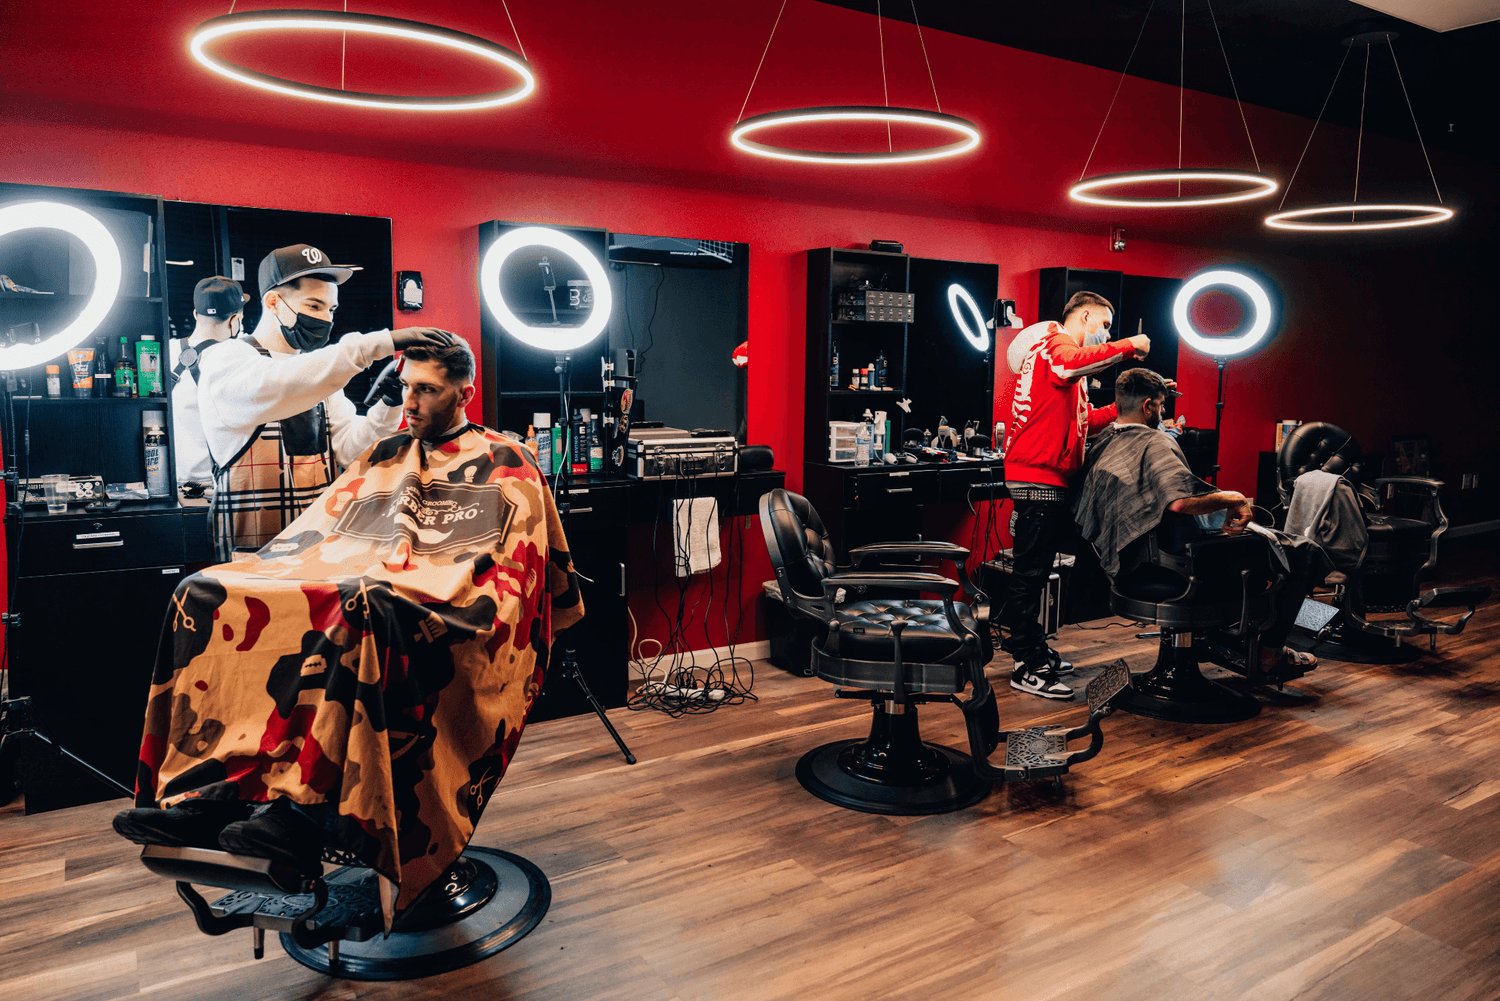 Two barber cutting hair with bright lights behind them.